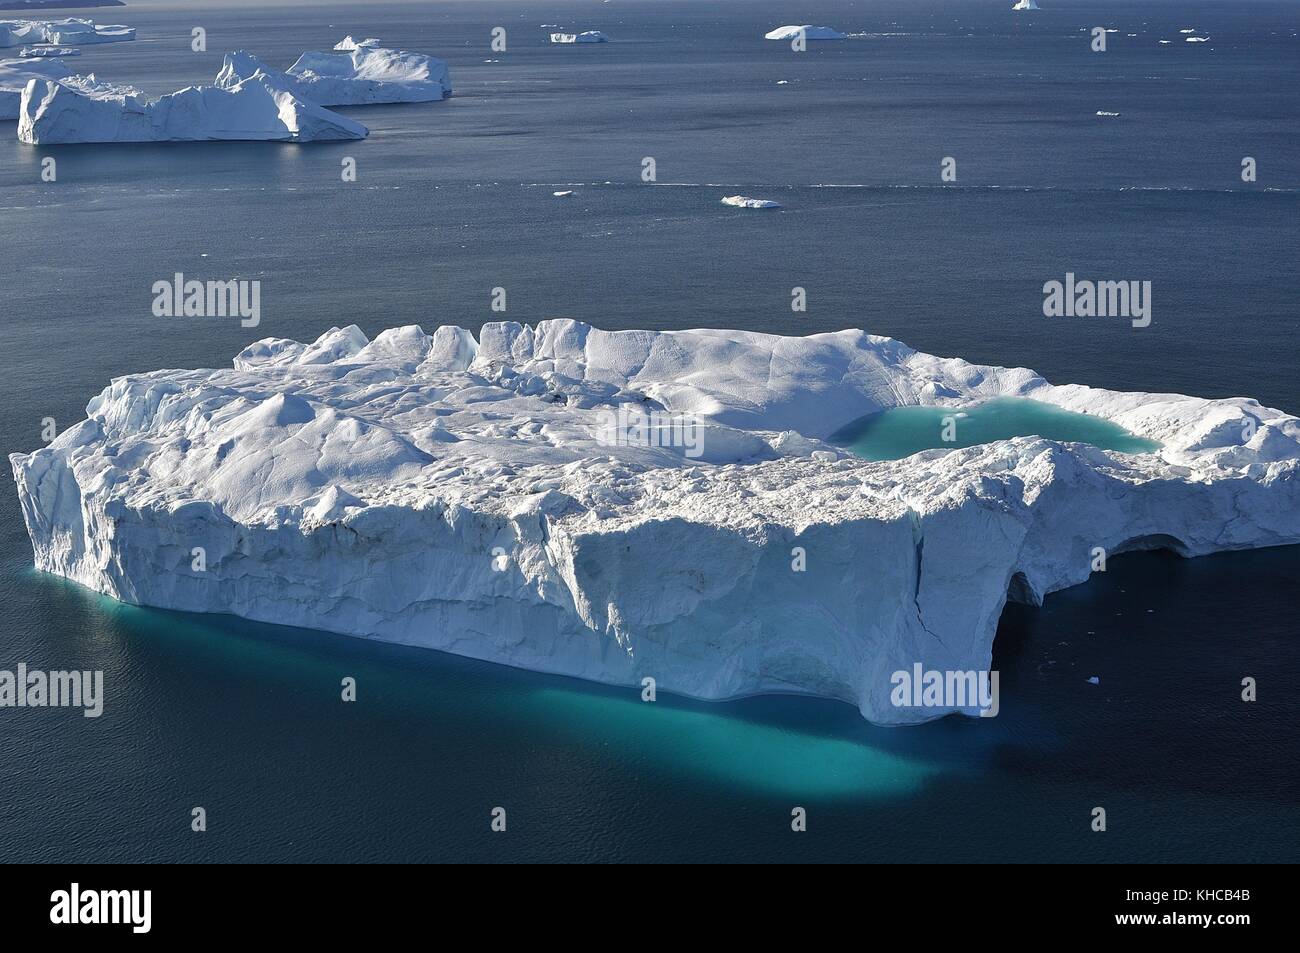 ICEBERGS ABOUT TO CALVE FROM ILULISSAT GLACIER Stock Photo